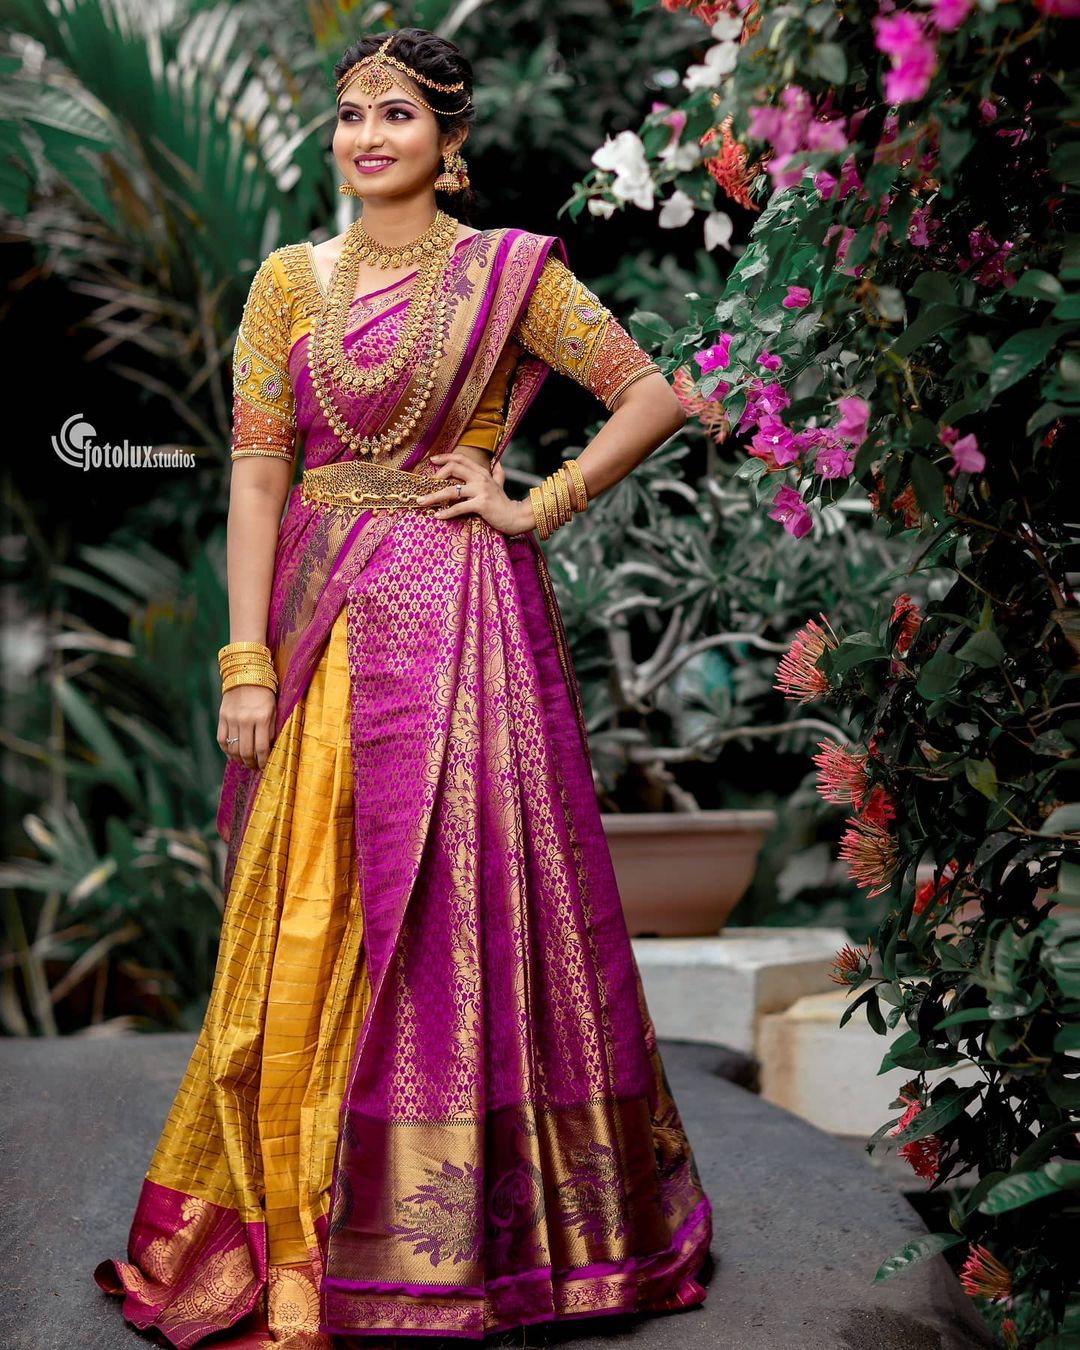 Venba In Traditional South Indian Yellow & Purple Lehenga Saree Look With Heavy Gold Jewellery